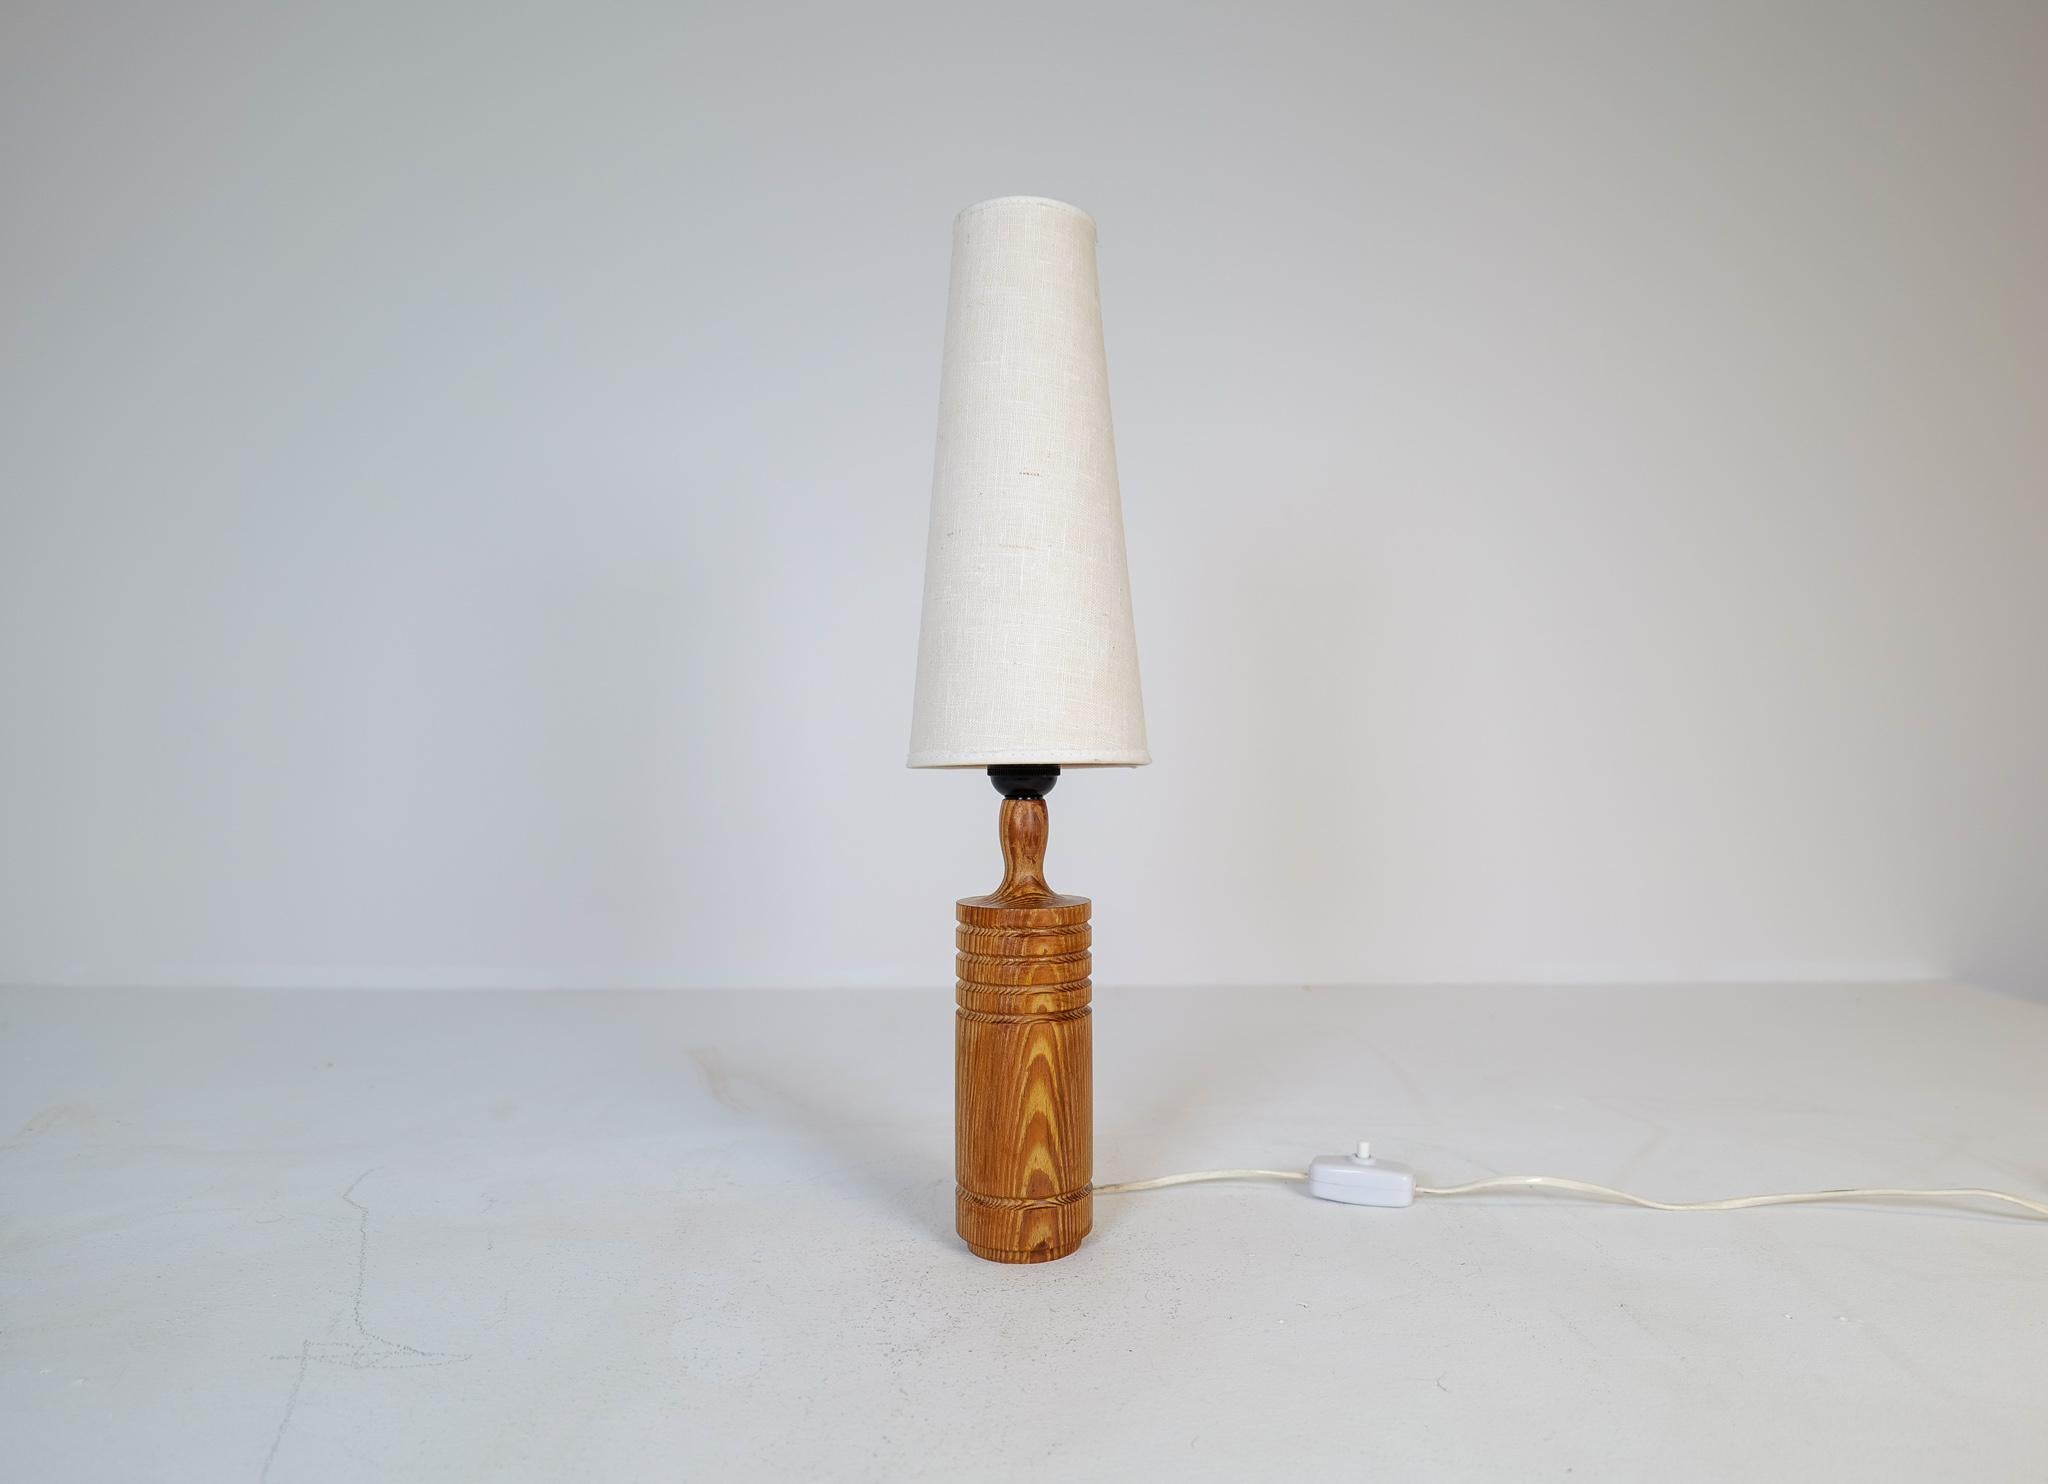 Table lamp produced in pine, designed by Lars Toller Timmersdala Sweden. Nice, sculptured table lamp with an original shade. 

Good working vintage condition, with wear consistent with age and use. 

Dimensions: Heigh with shade 53 cm base 10 cm